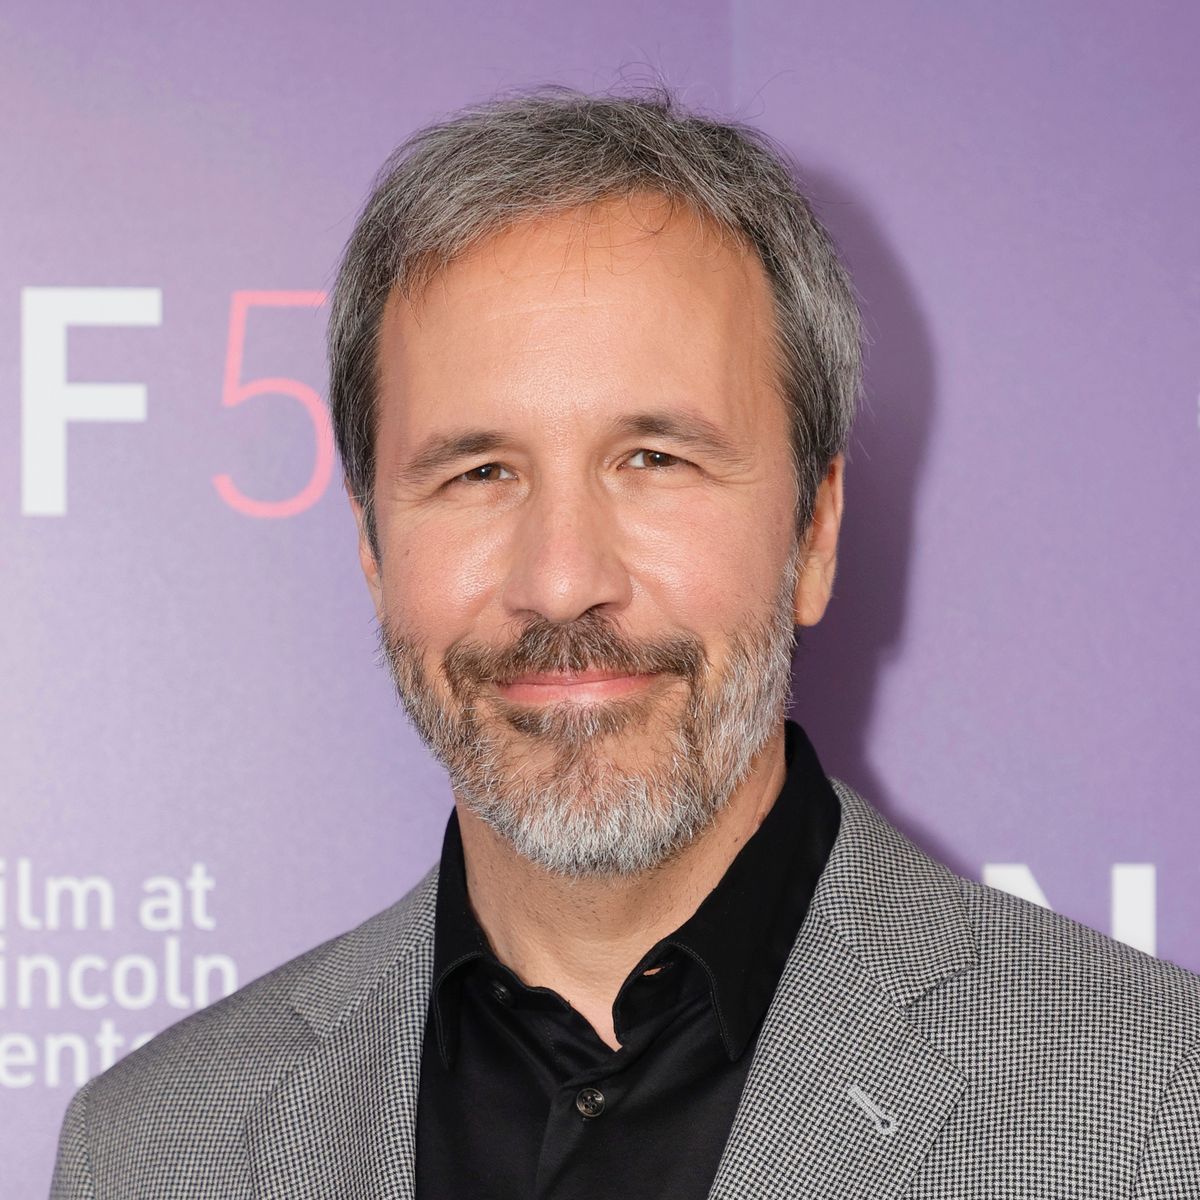 NEW YORK, NEW YORK - OCTOBER 07: Director Denis Villeneuve attends the U.S. premiere of "Dune" during the 59th New York Film Festival at Alice Tully Hall, Lincoln Center on October 07, 2021 in New York City. (Photo by Michael Loccisano/Getty Images)